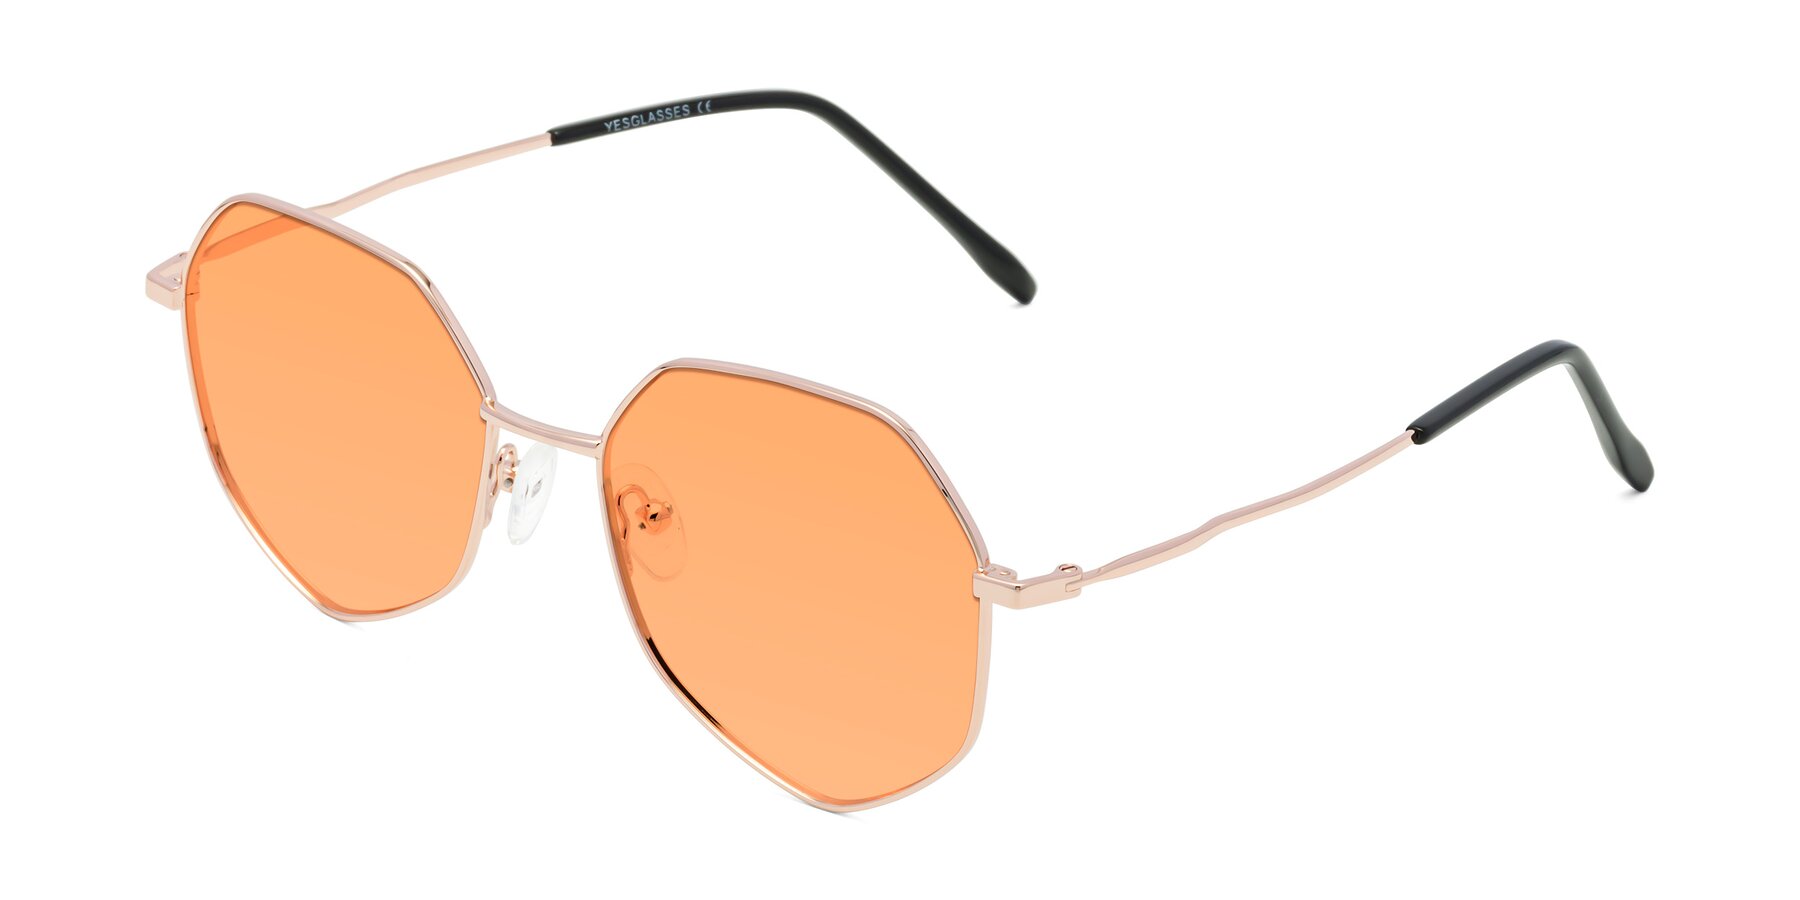 Angle of Sunshine in Rose Gold with Medium Orange Tinted Lenses